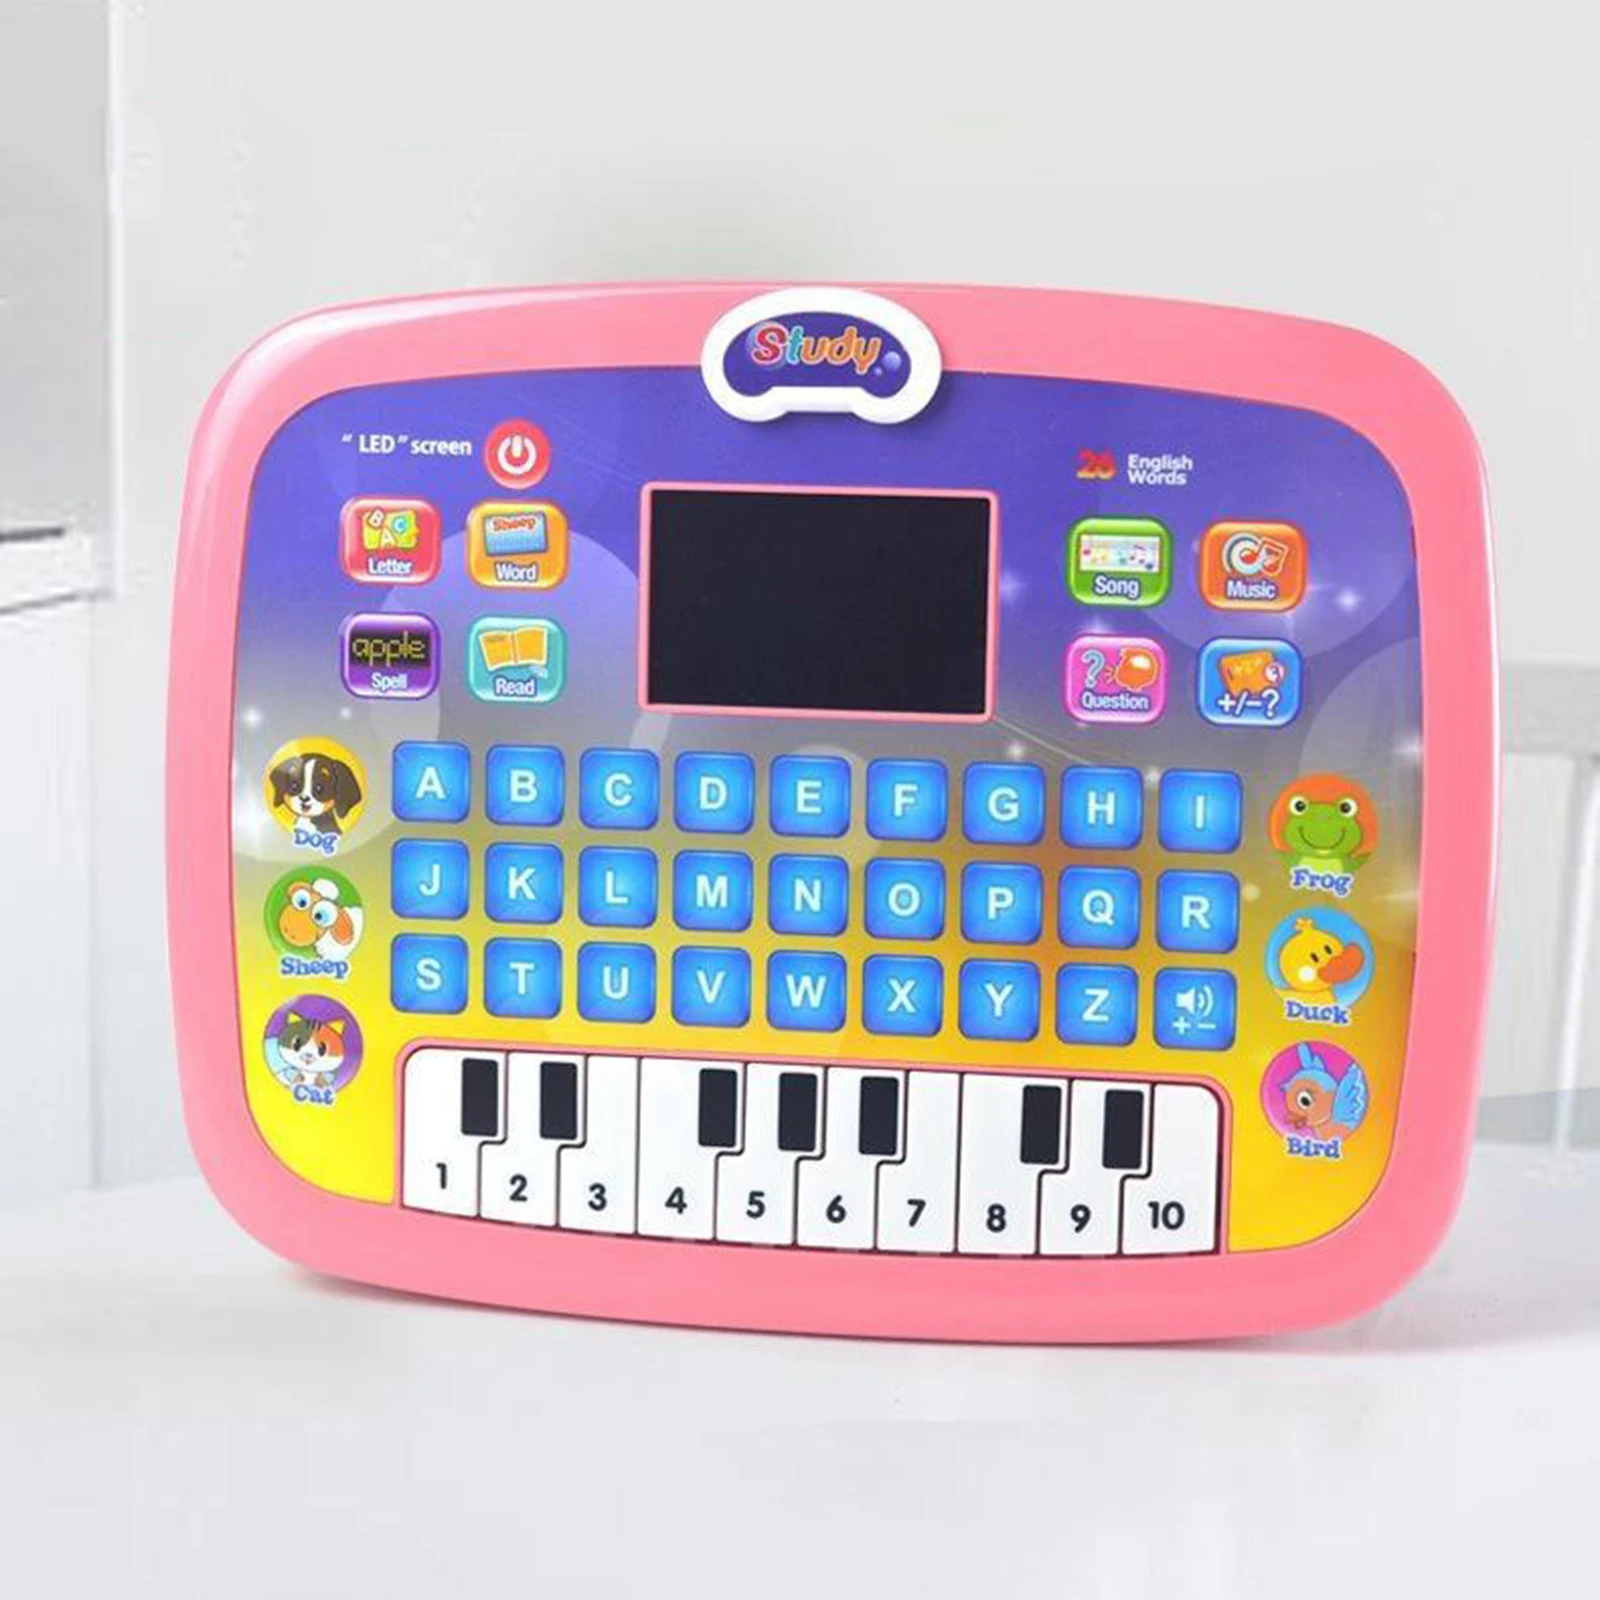 Educational Computer Toys LED Screen Teaching Learning Tablet Machine Gifts